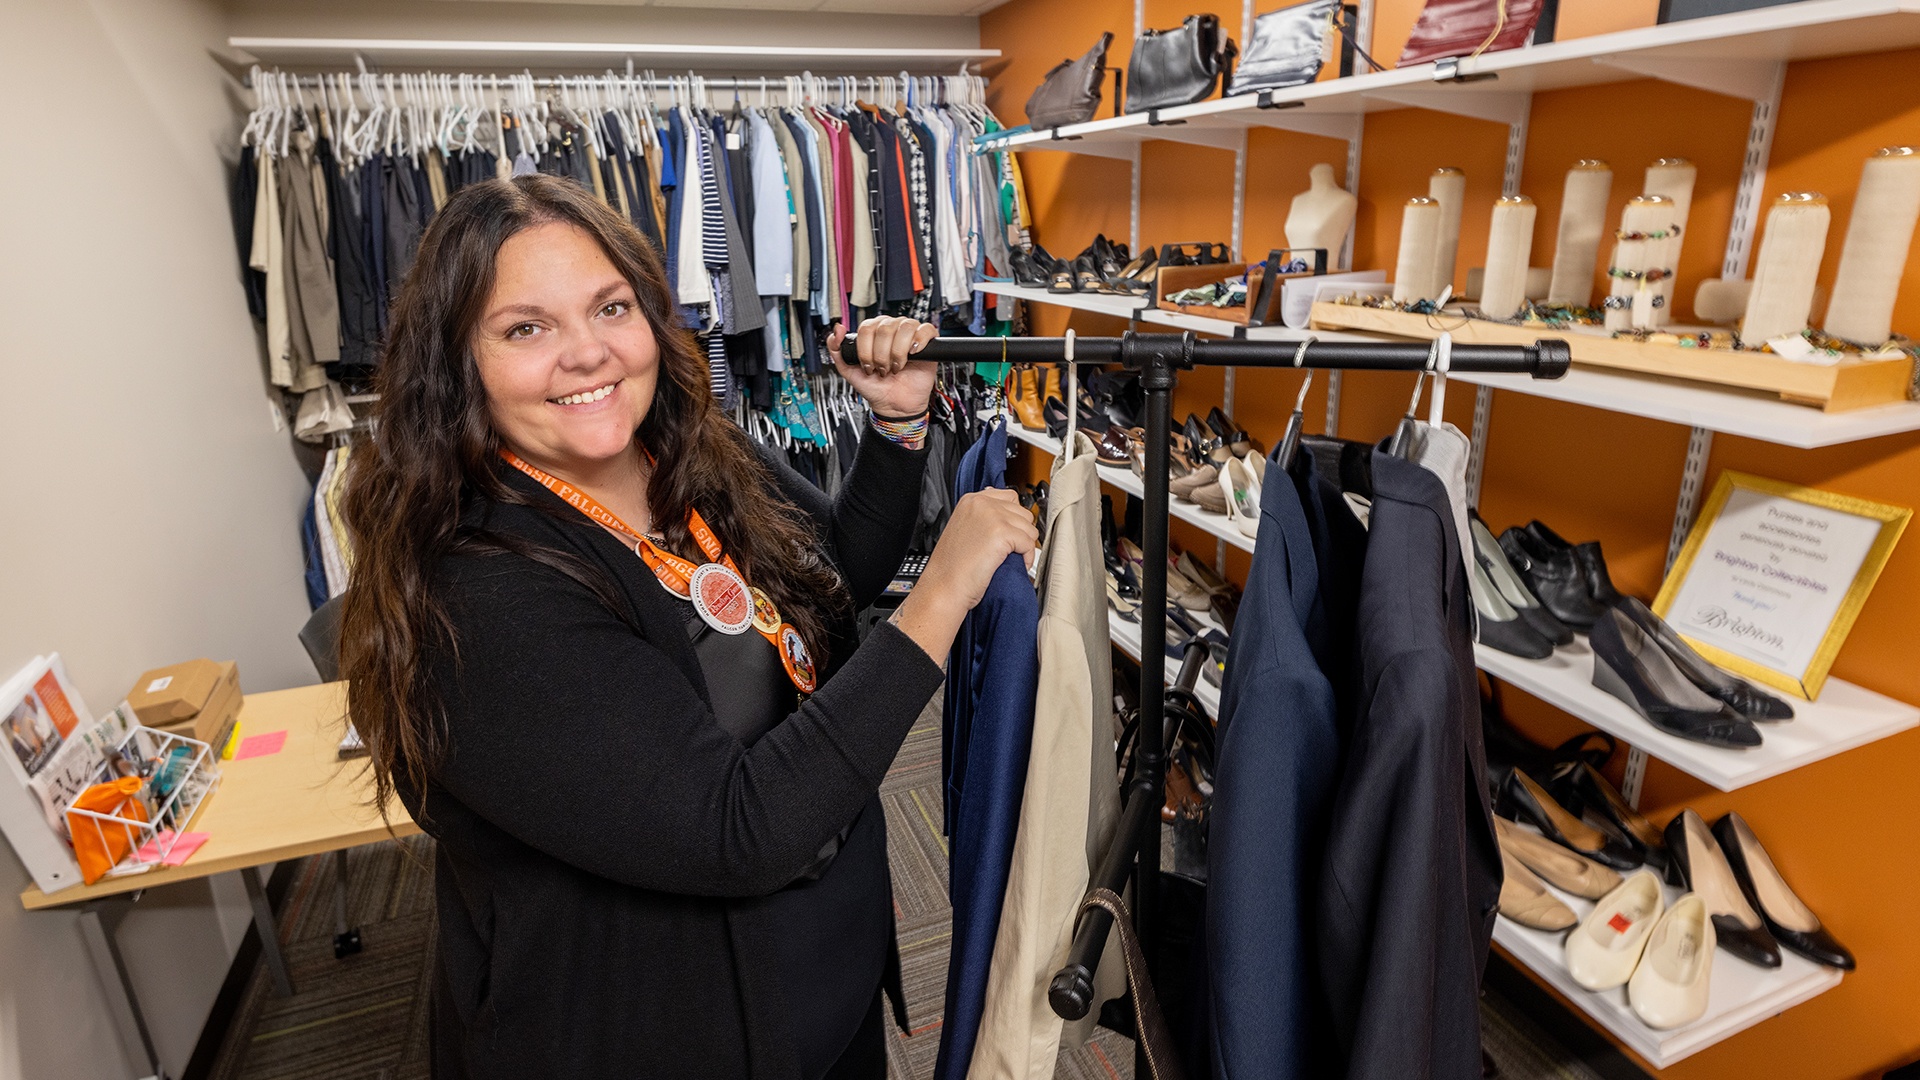 BGSU graduate student Tiffany Eckert smiles in front of racks of clothing at Mr. Agne's Career Collection.